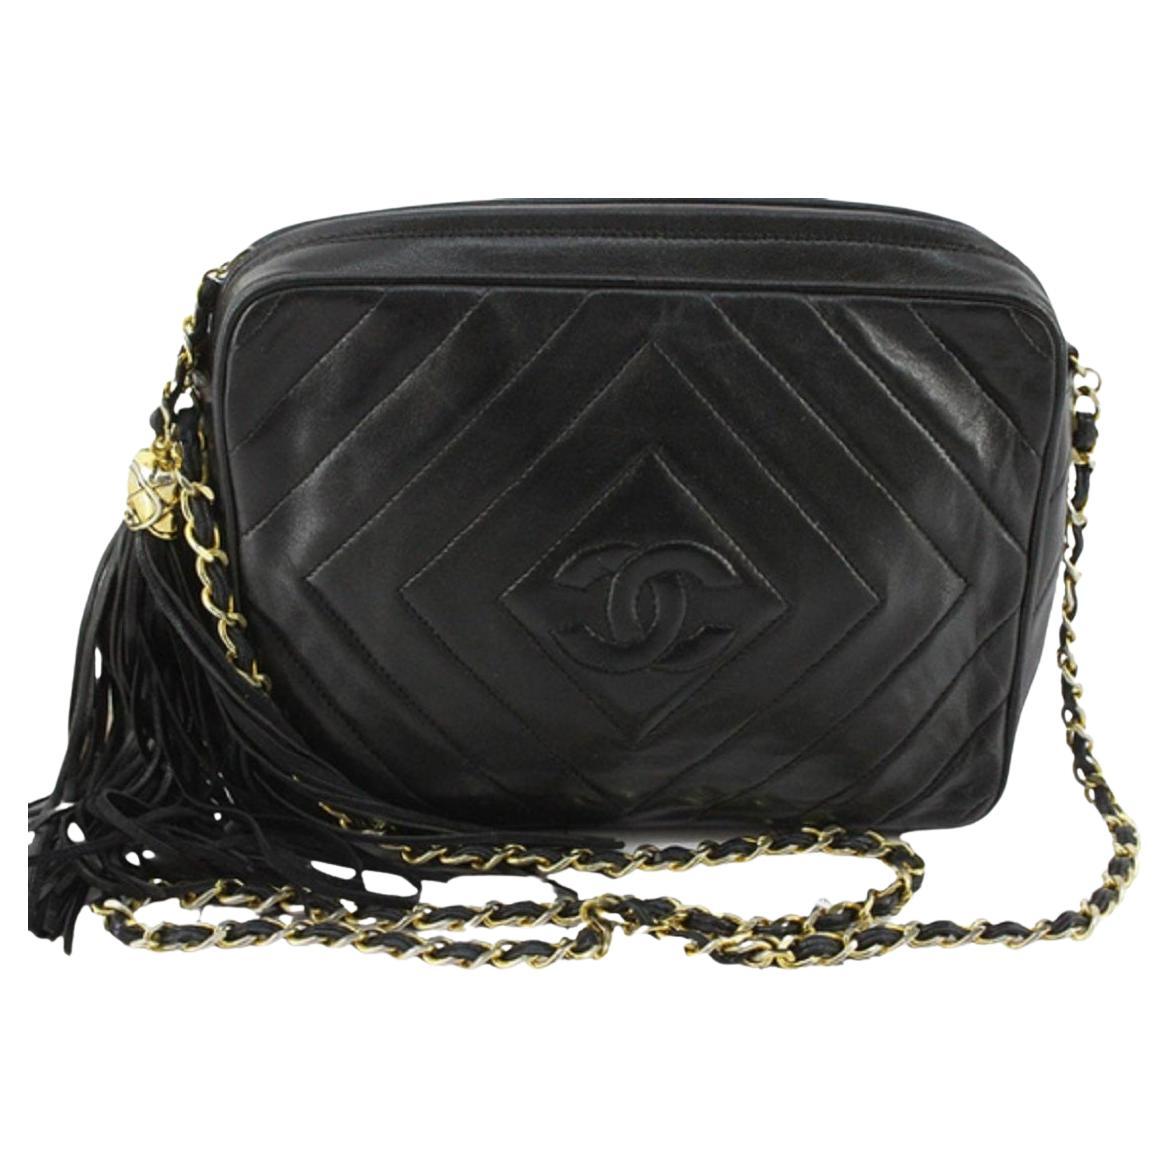 Chanel Black Chevron Quilted Lambskin Leather Camera Fringe Crossbody Bag For Sale